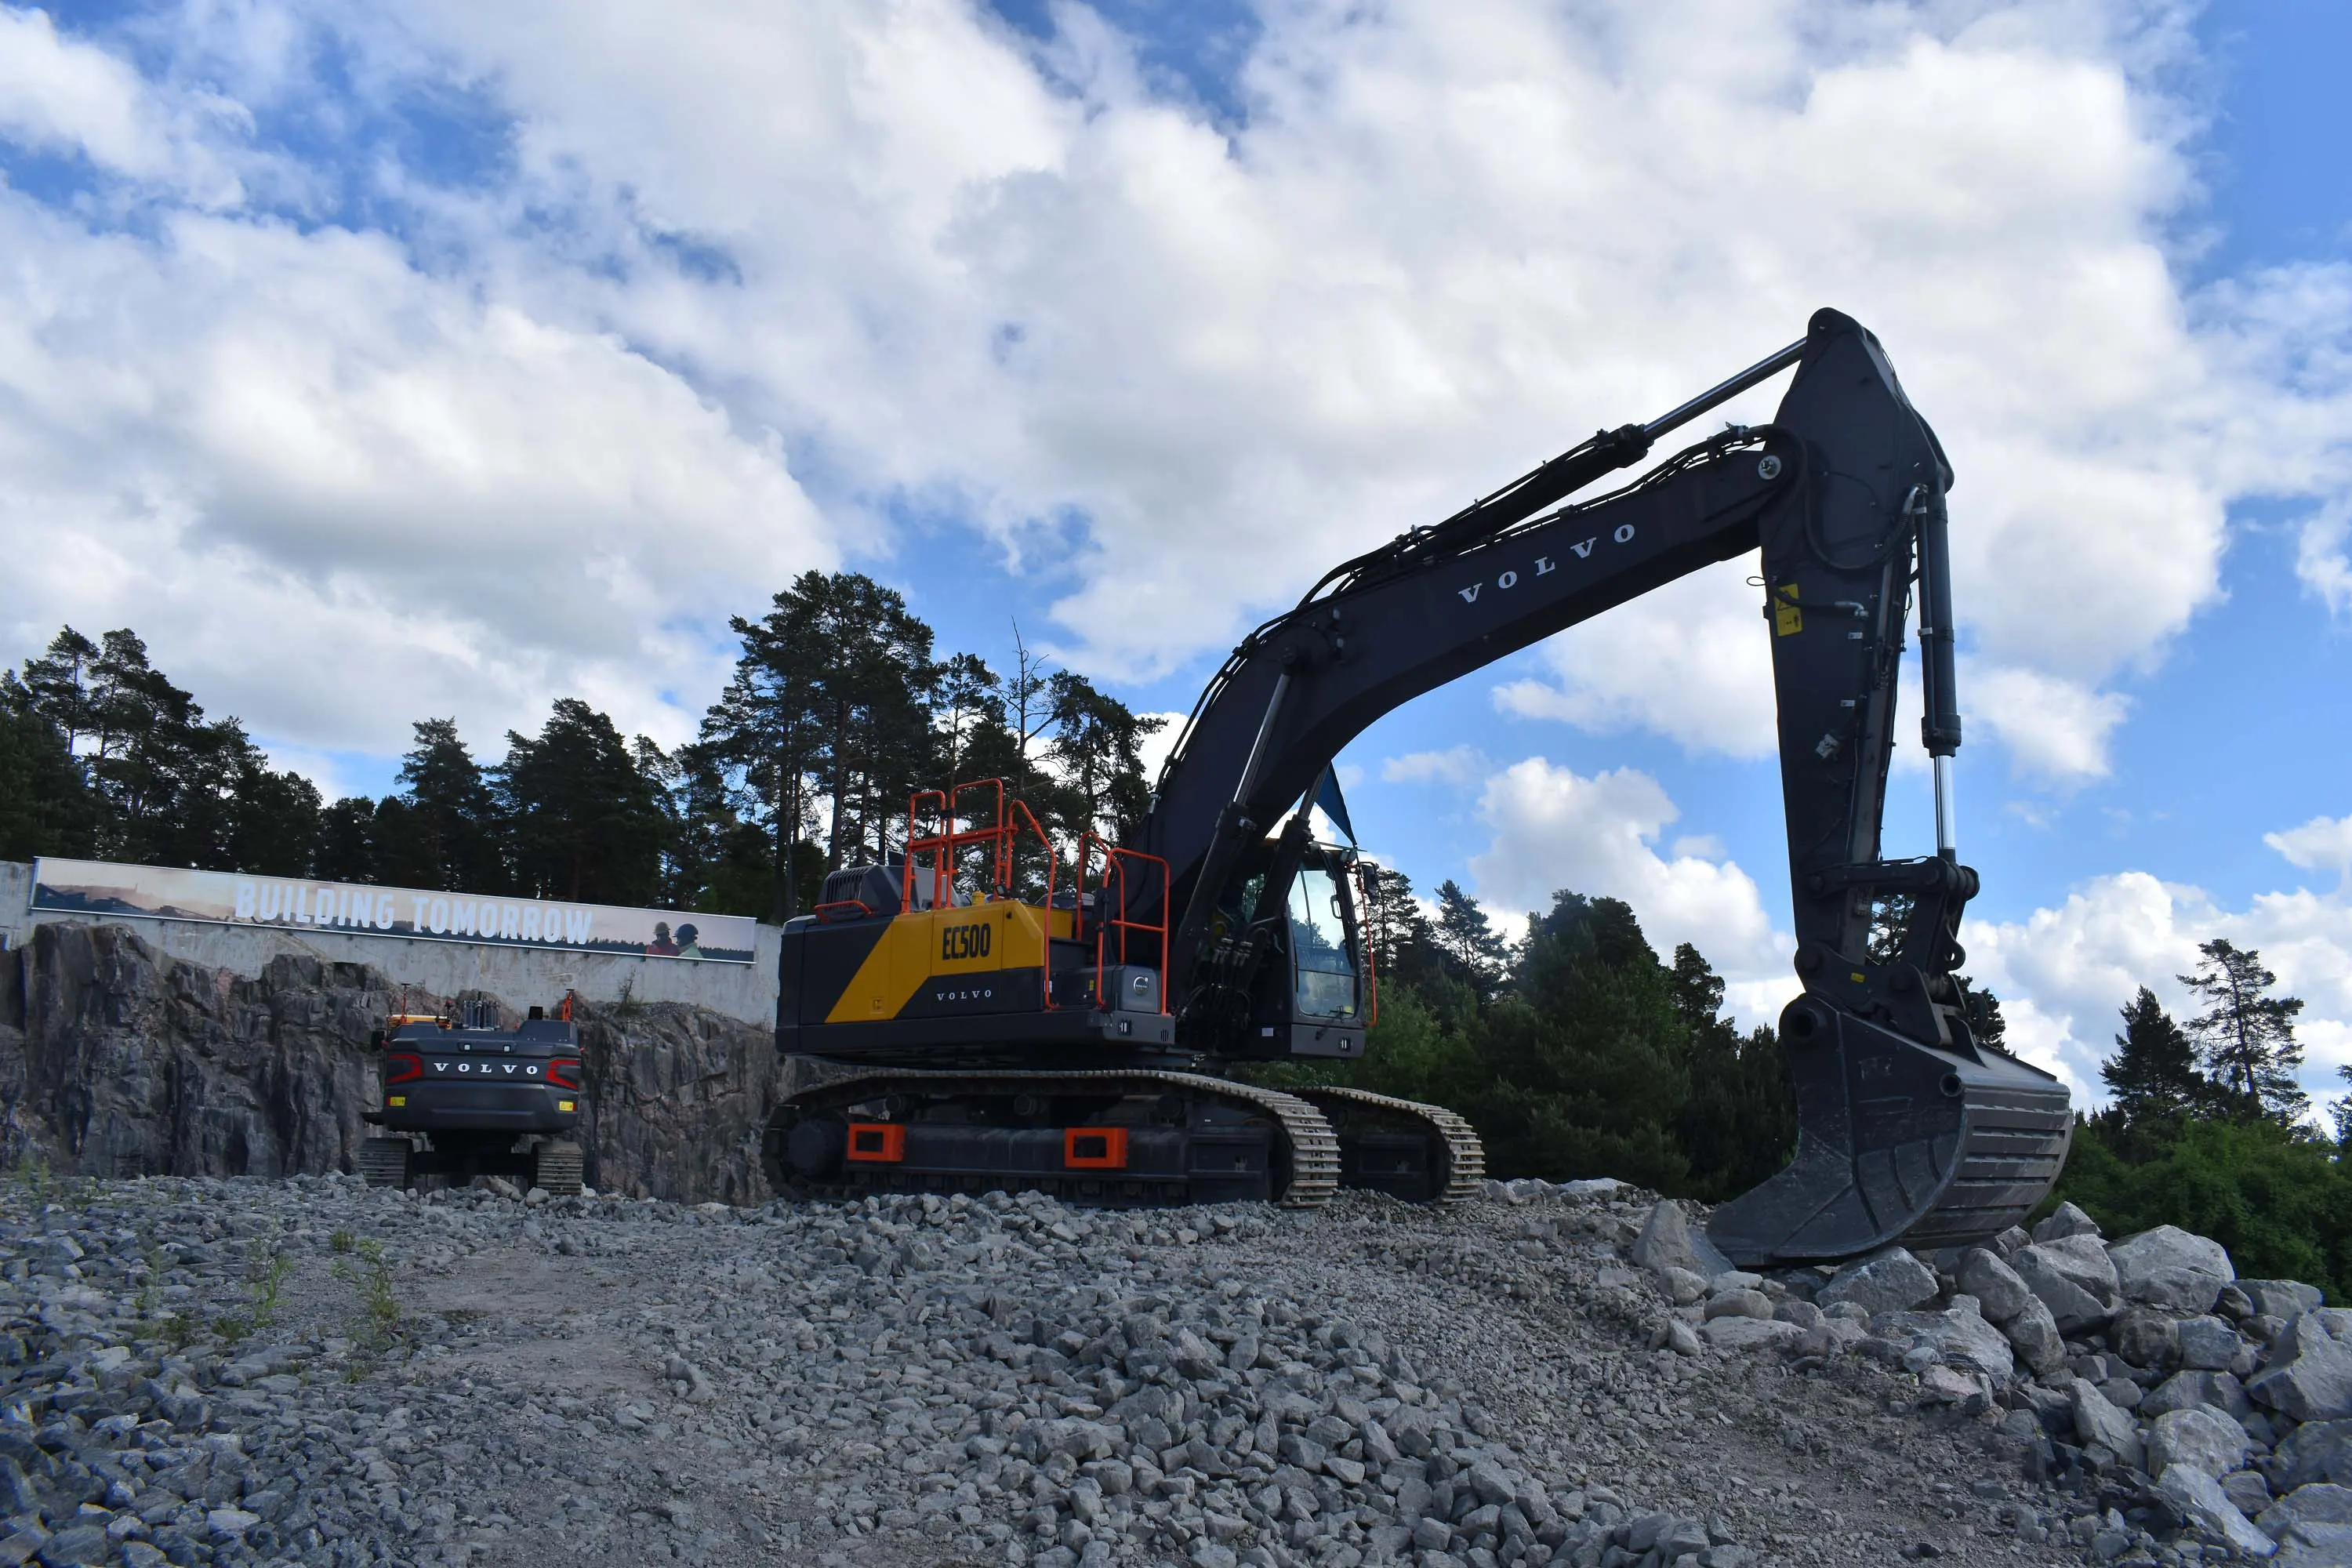 The new Volvo CE EC500 excavator on the top of a hill.